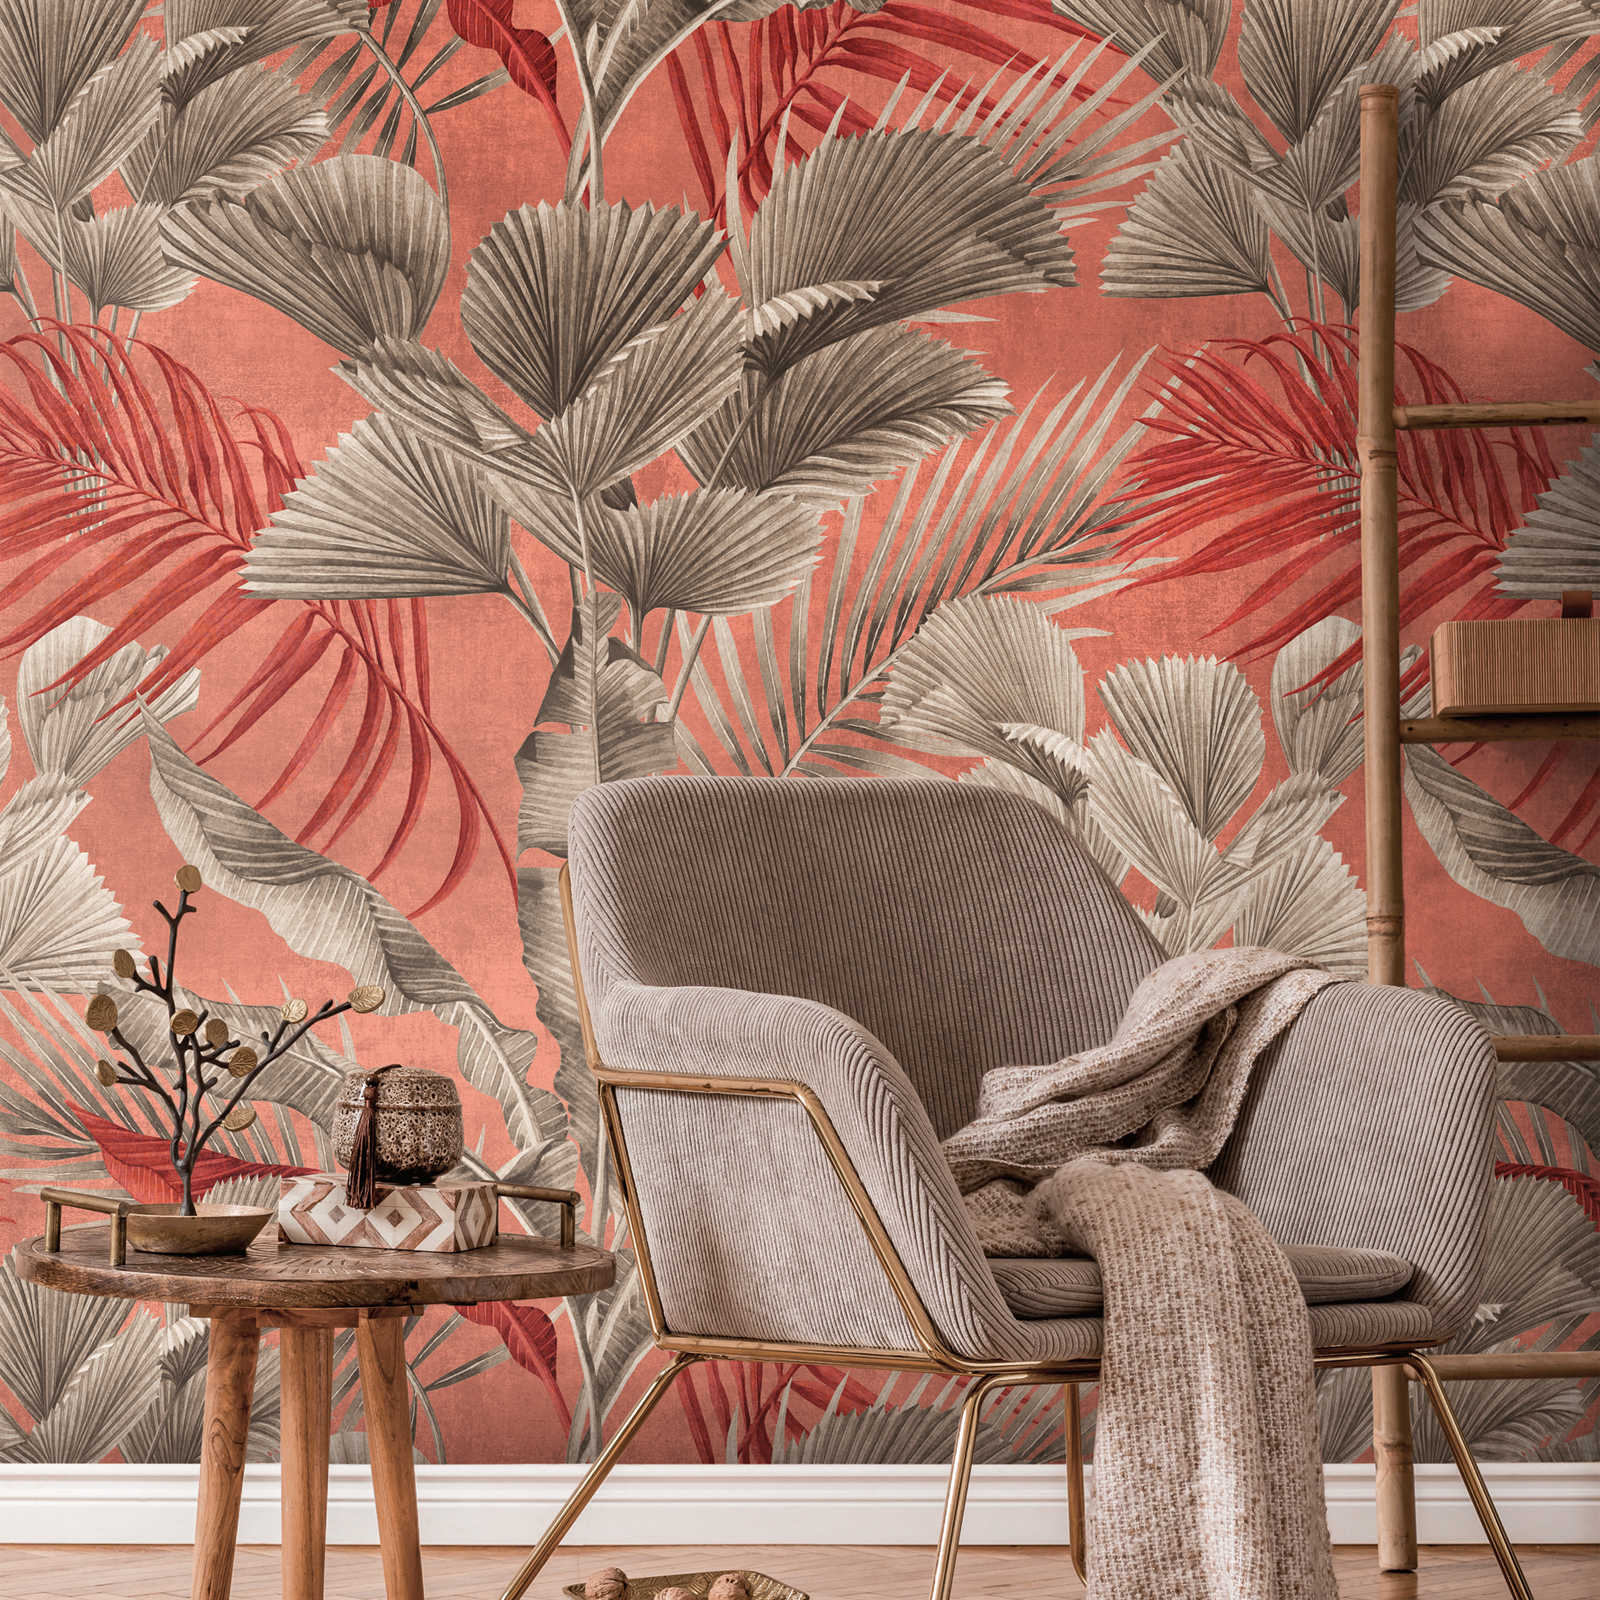 Jungle wallpaper with tropical plants - pink, red, grey
